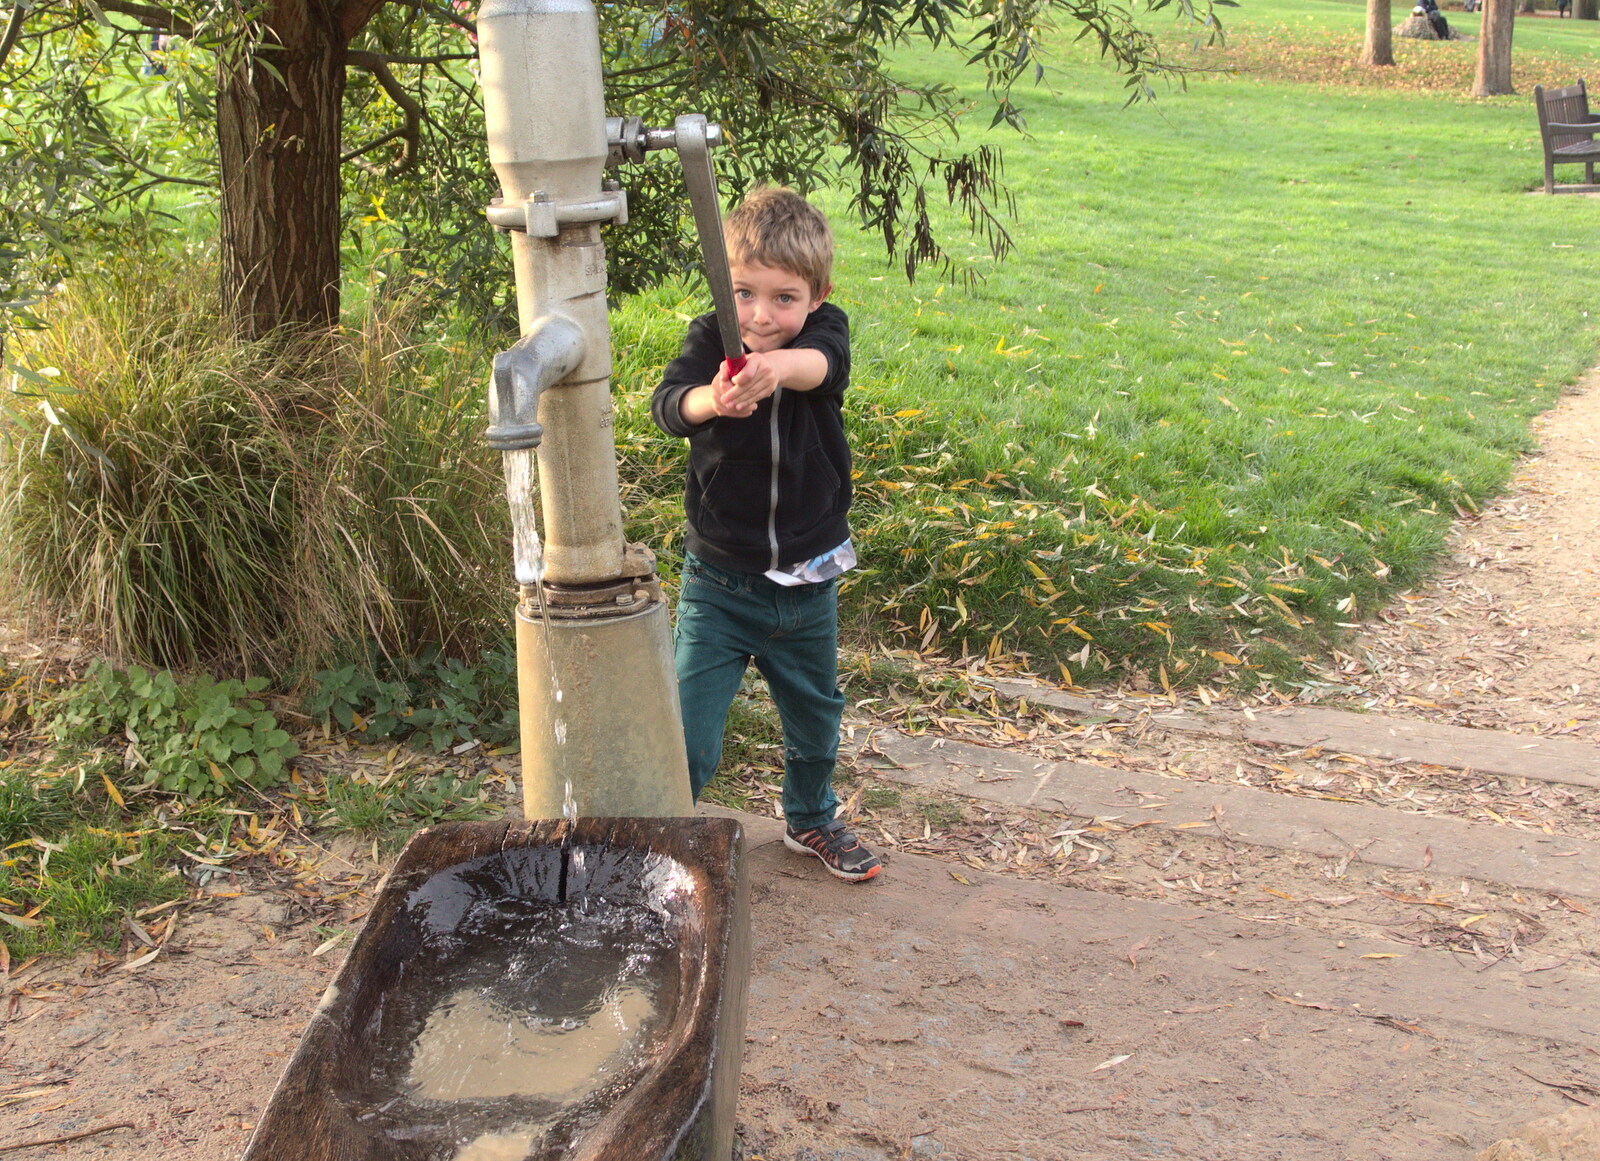 Fred on the water pump from Abbey Gardens in Autumn, Bury St. Edmunds, Suffolk - 27th October 2015